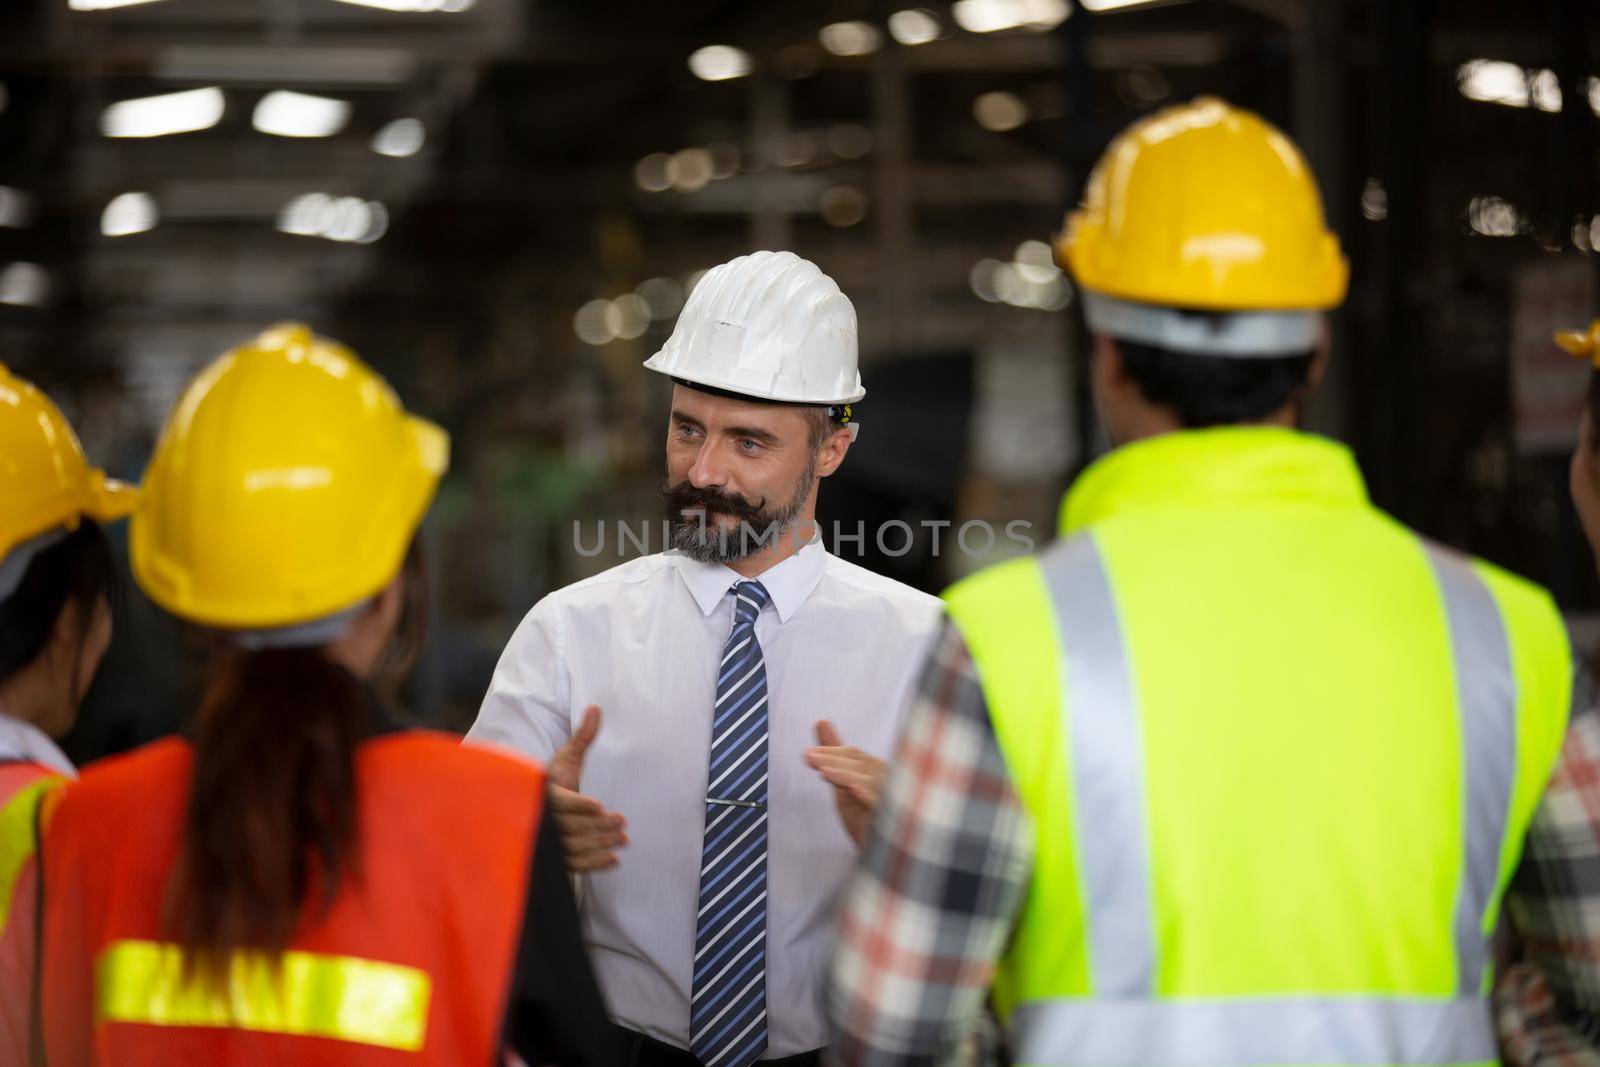 Male Industrial Engineers Talk with Factory Worker . They Work at the Heavy Industry Manufacturing Facility.